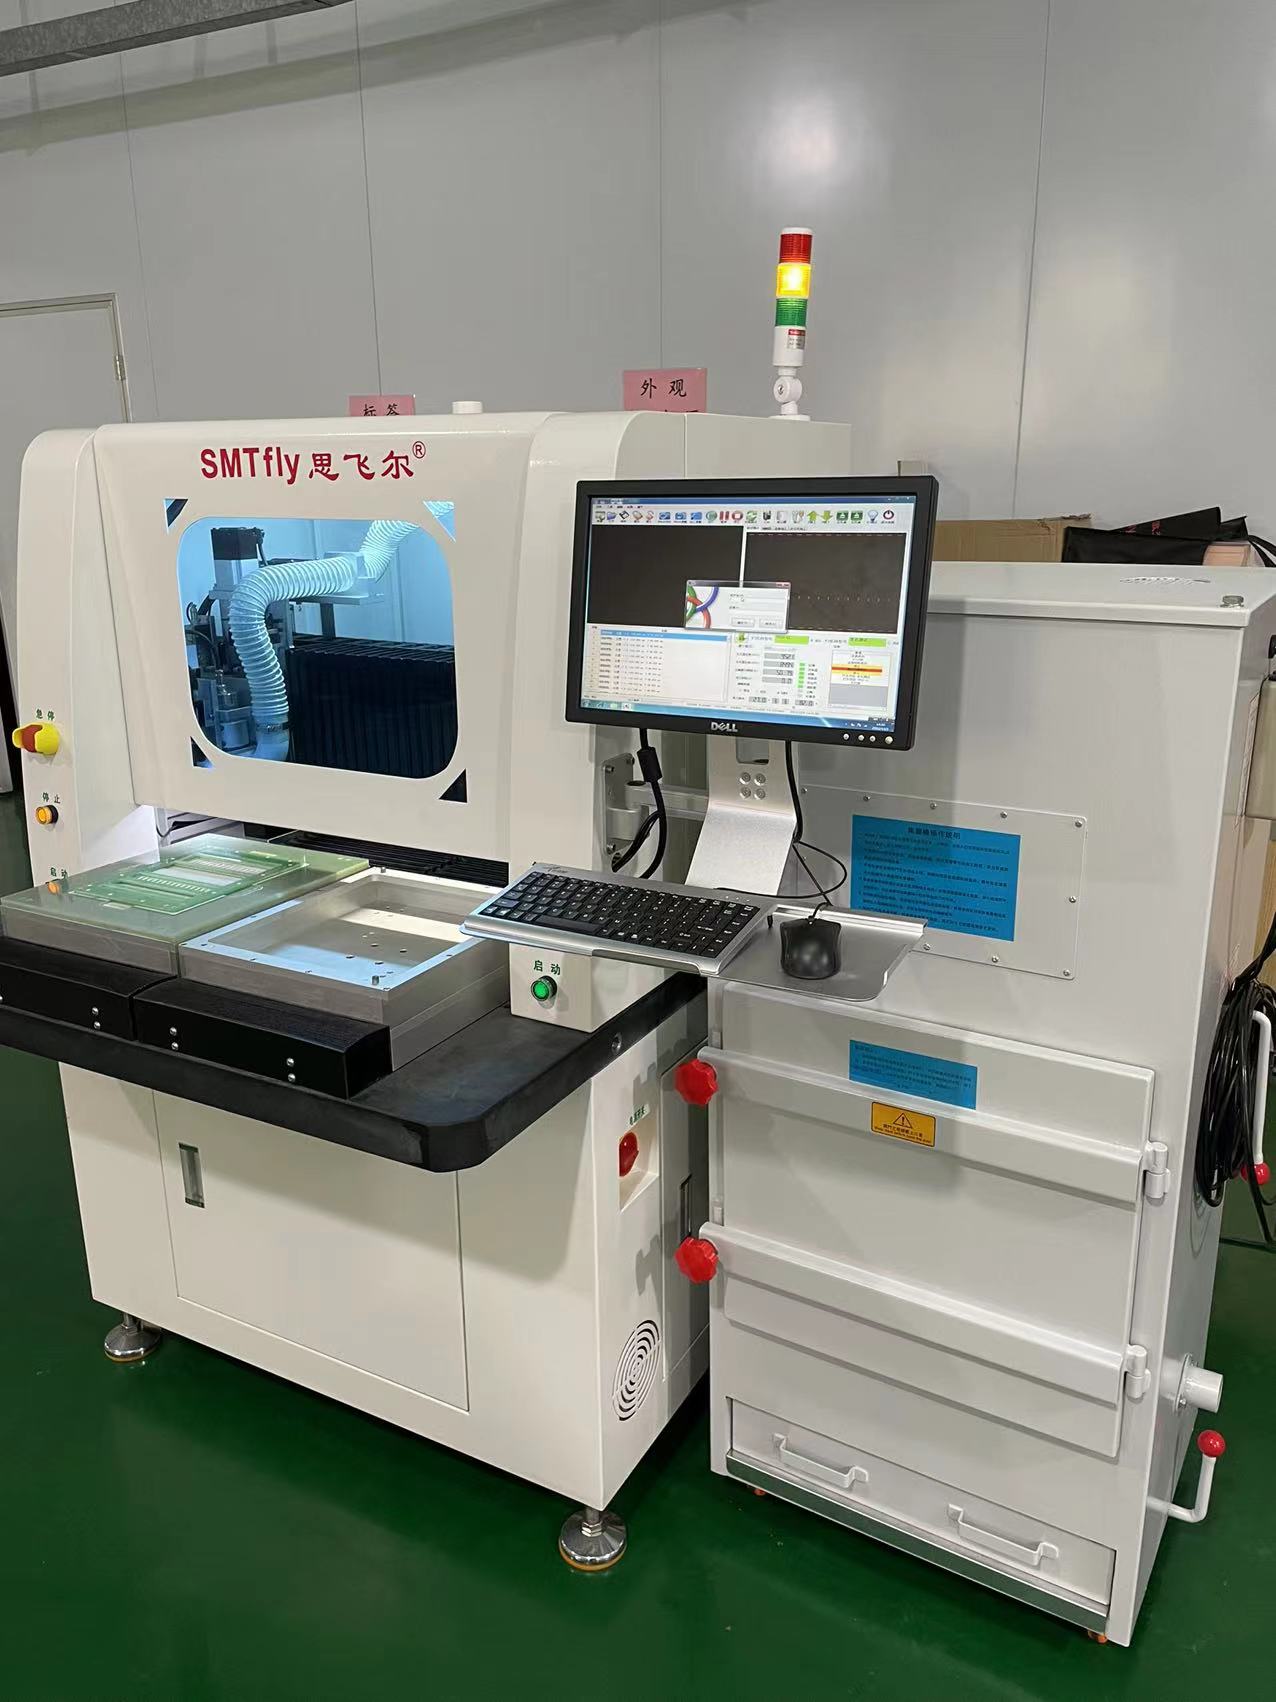 CNC PCB Router Machine PCB Separator with Milling Joints SMTfly-F01